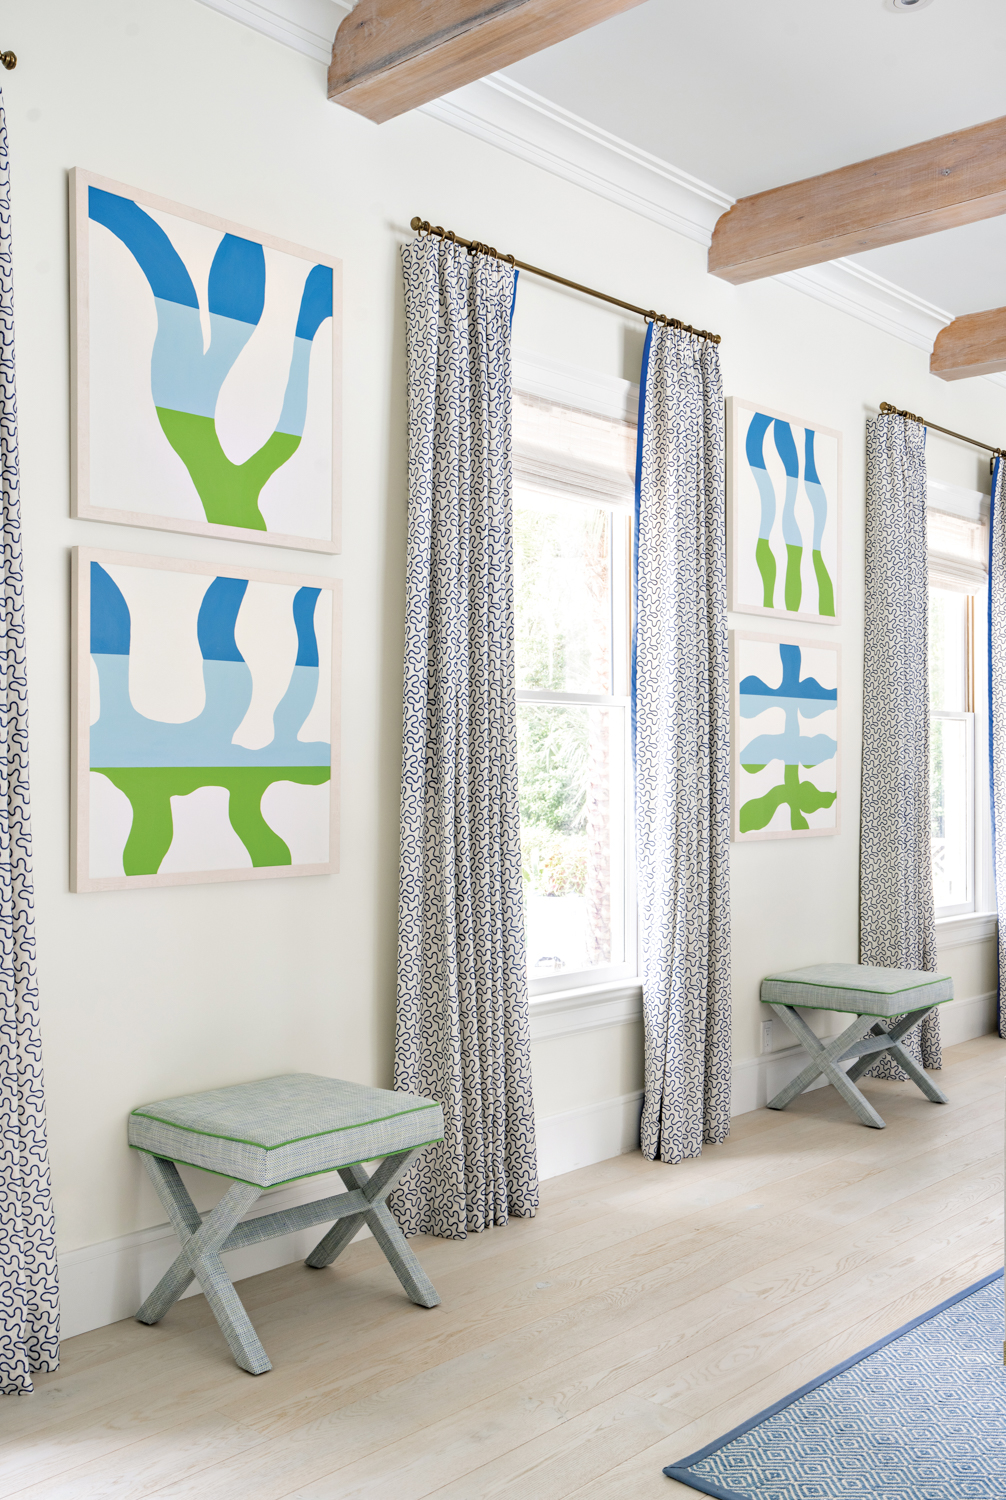 Hallway with blue-and-green abstract artworks flanking a window with patterned curtains